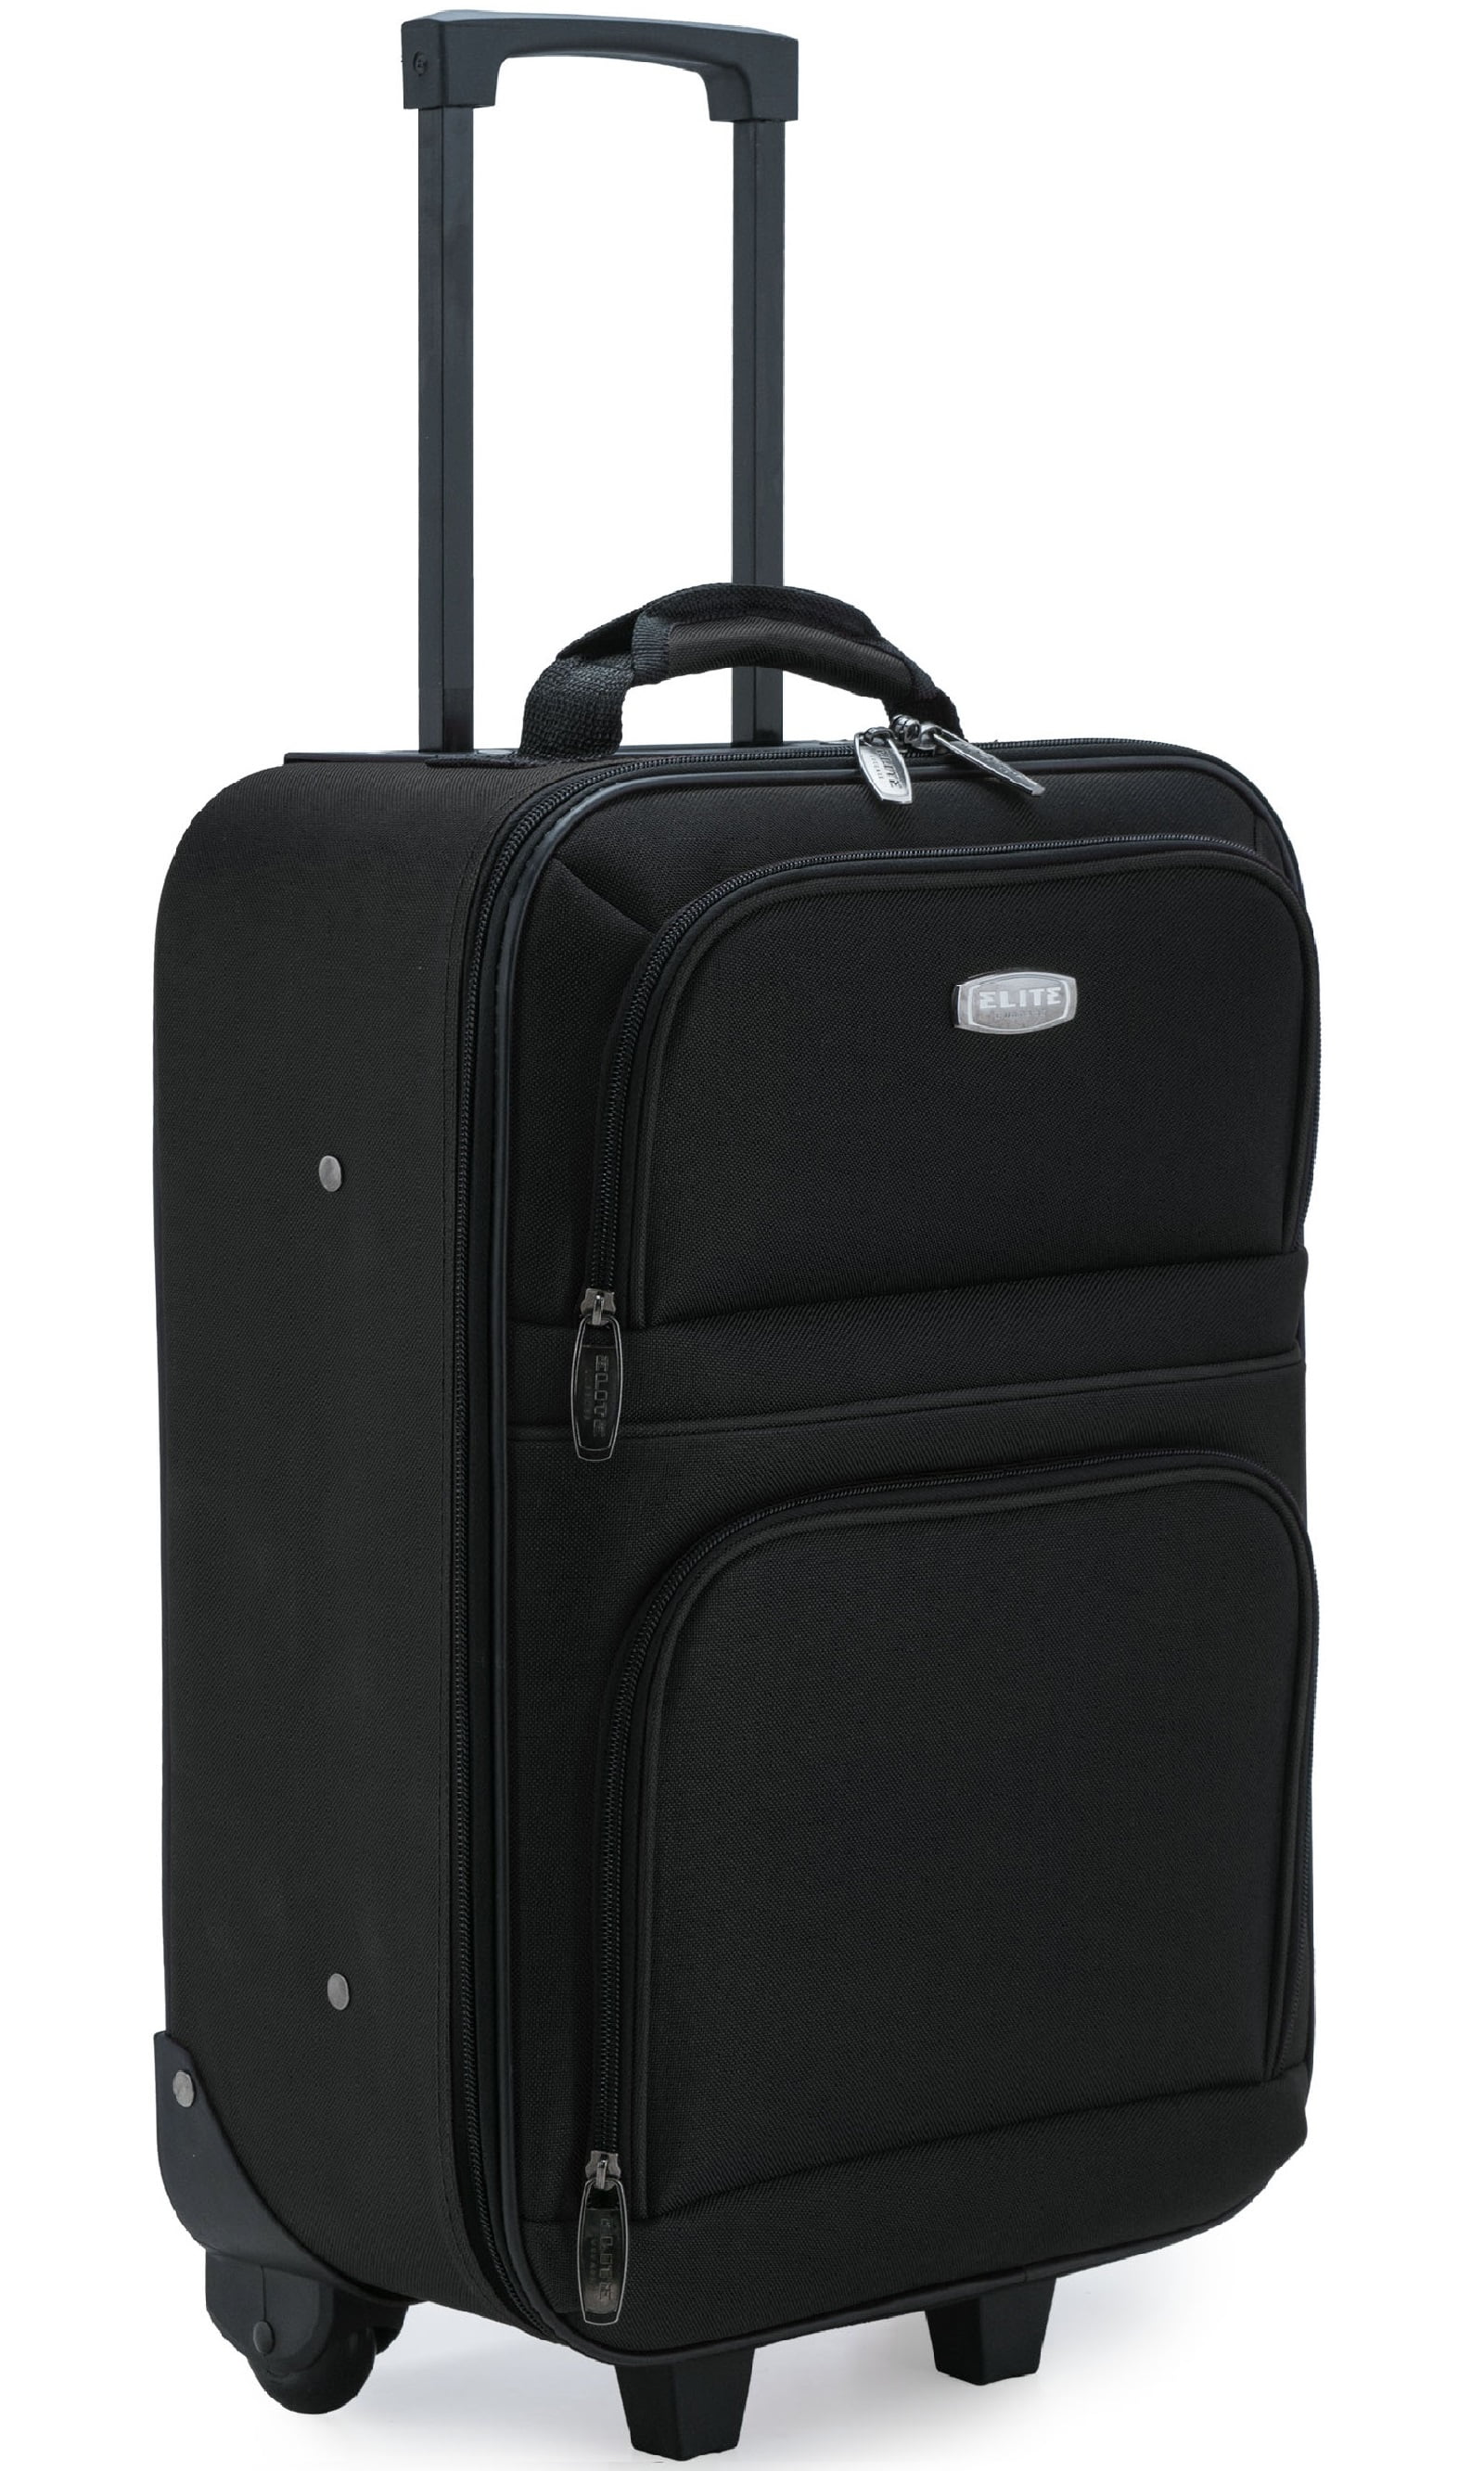 Elite Luggage Meander — 19.5" Carry-On Rolling Suitcase Travel Luggage with Protective Foam Padding Black